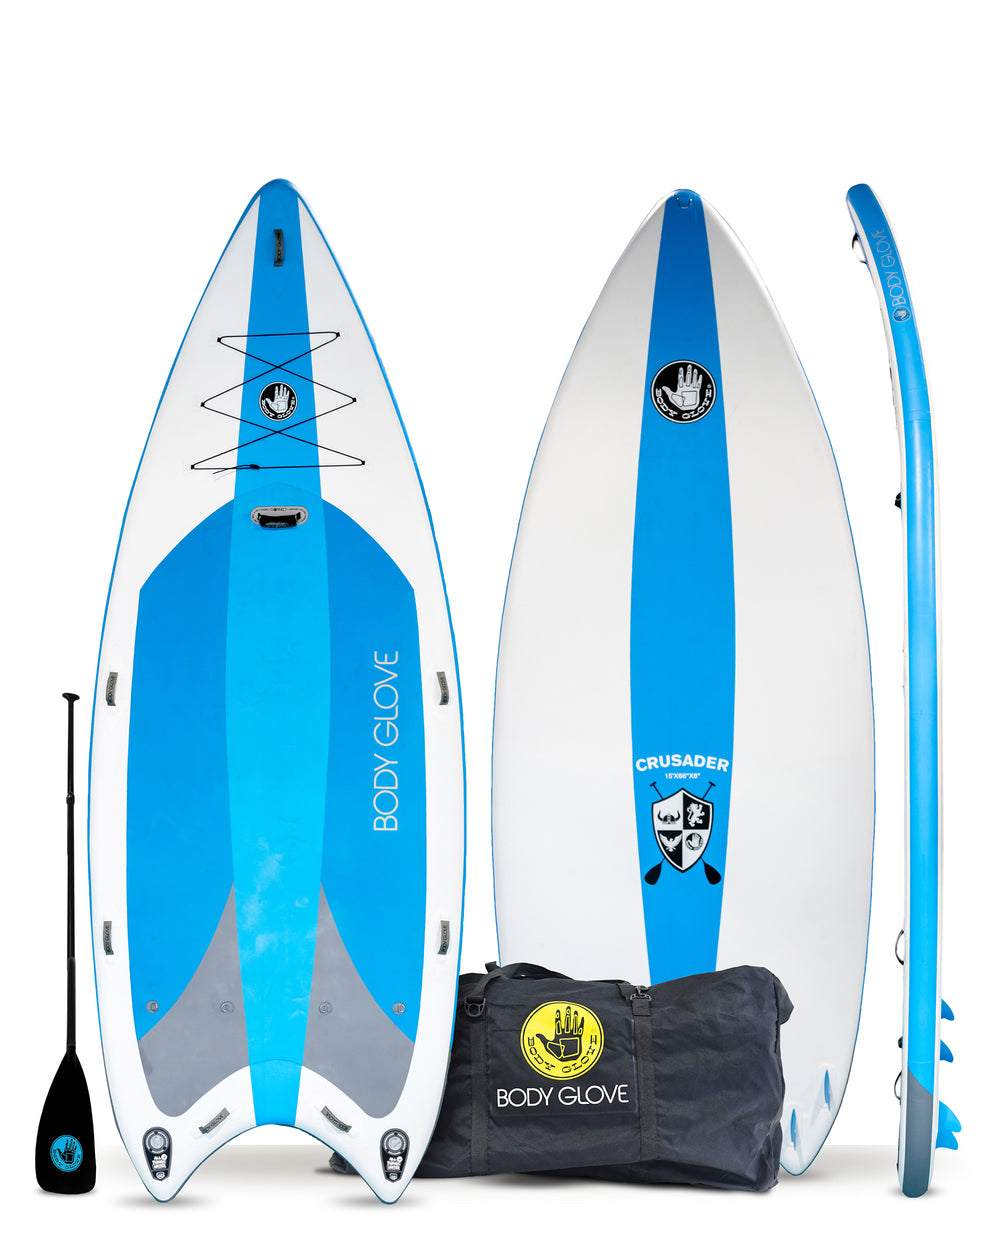 Crusader 15' Multi-Person Inflatable Paddle Board - Cobalt/White